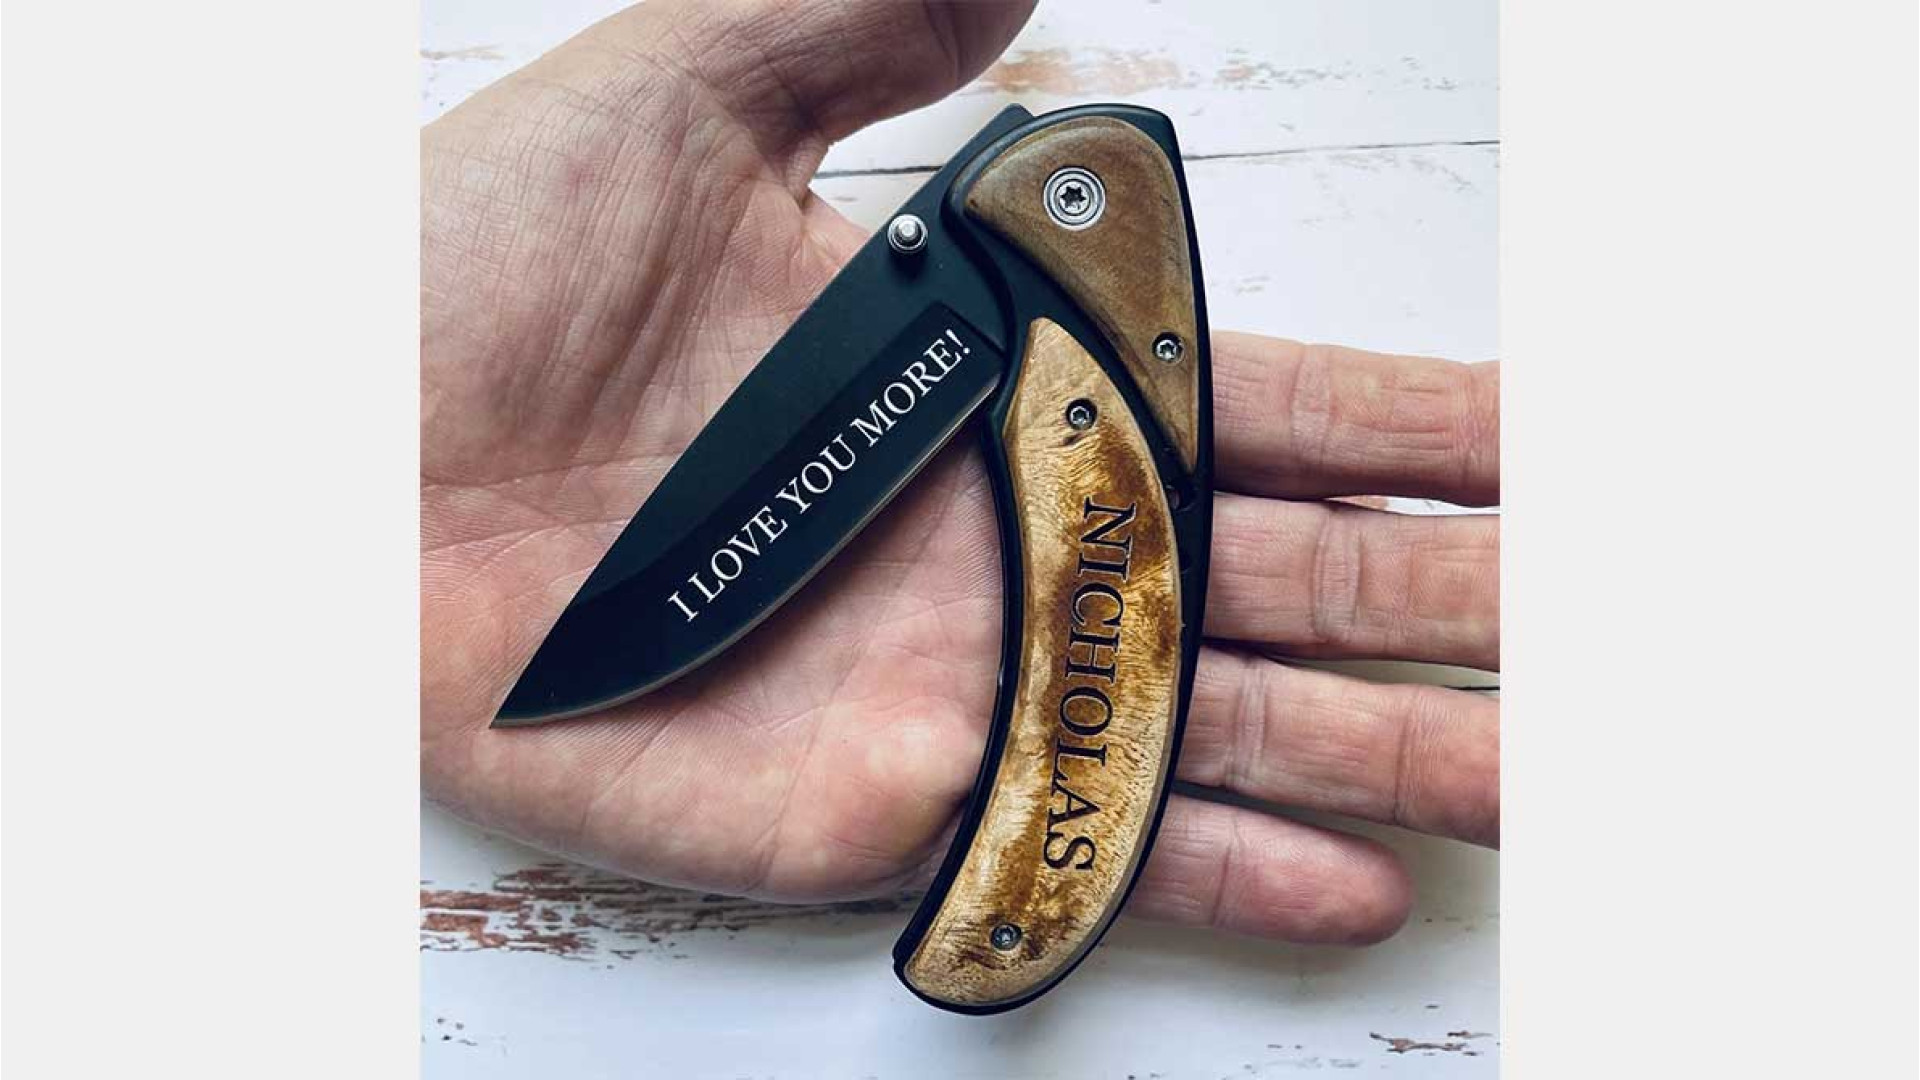 https://www.ckbproducts.com/image/cache/catalog/New%20Blog%20Images/img-20-best-phrases-to-engrave-into-your-knives-1920x1080.jpg